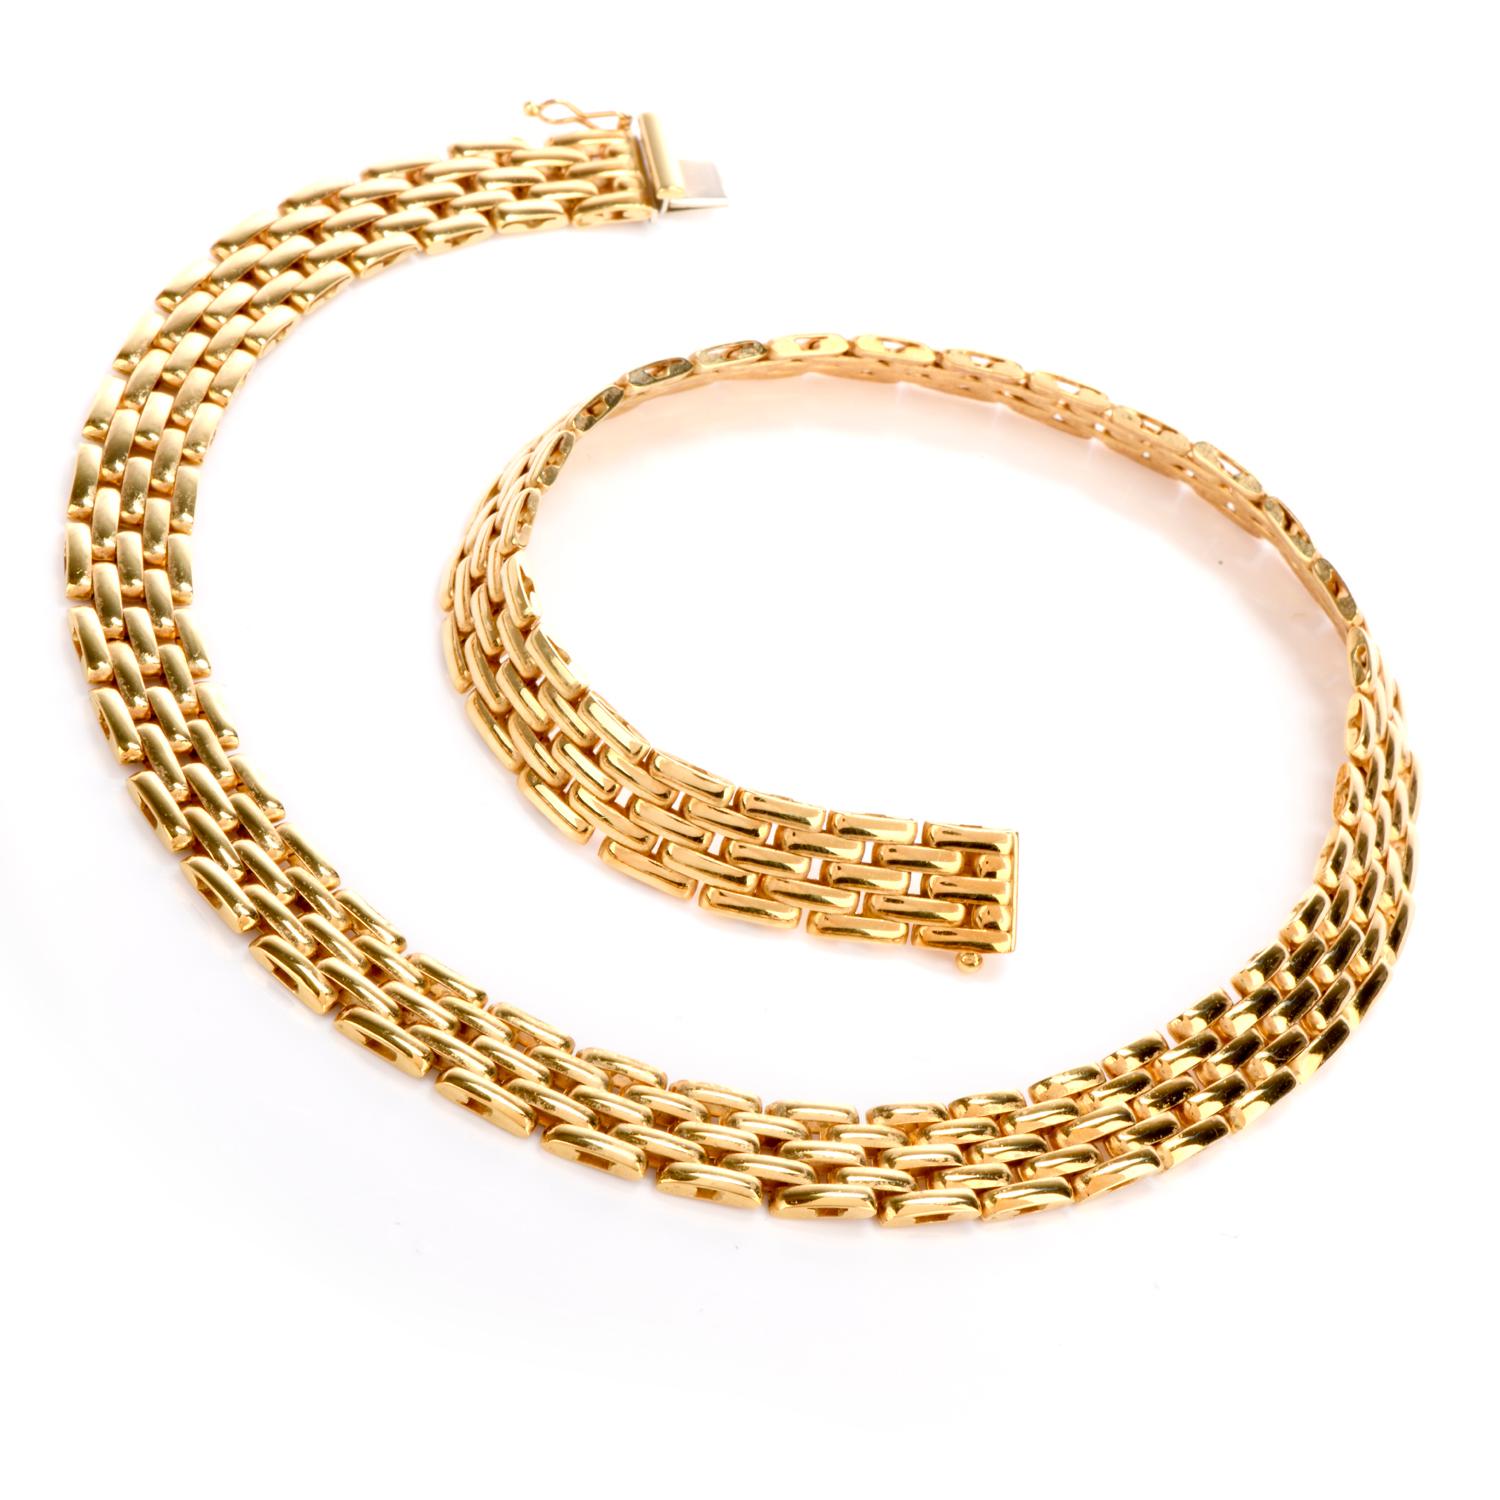 This Lustrous Italian Mayor Necklace was inspired of an Interlocking panther pattern and crafted in 18K gold. Nicely Made with interlocking weave of this necklace has a beautiful and bright high polished finish that is certain to compliment any